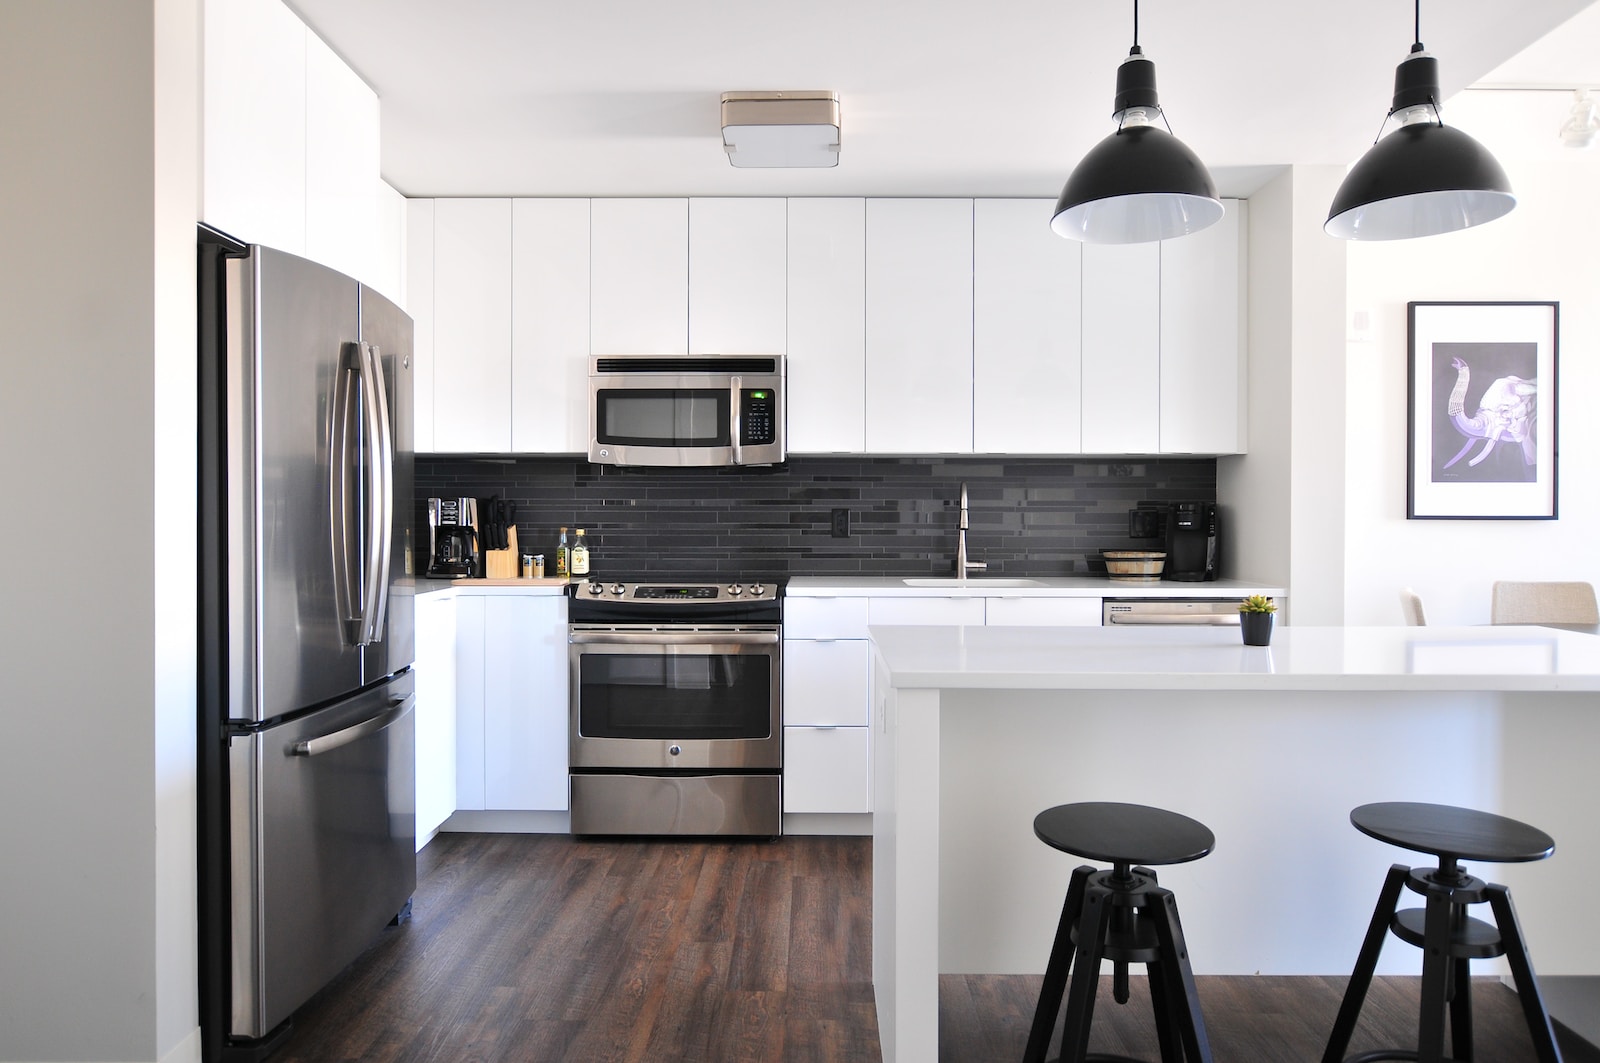 Energy-Efficient Appliances help combat the rising energy cost in Melbourne and provide homeowners with peace of mind.